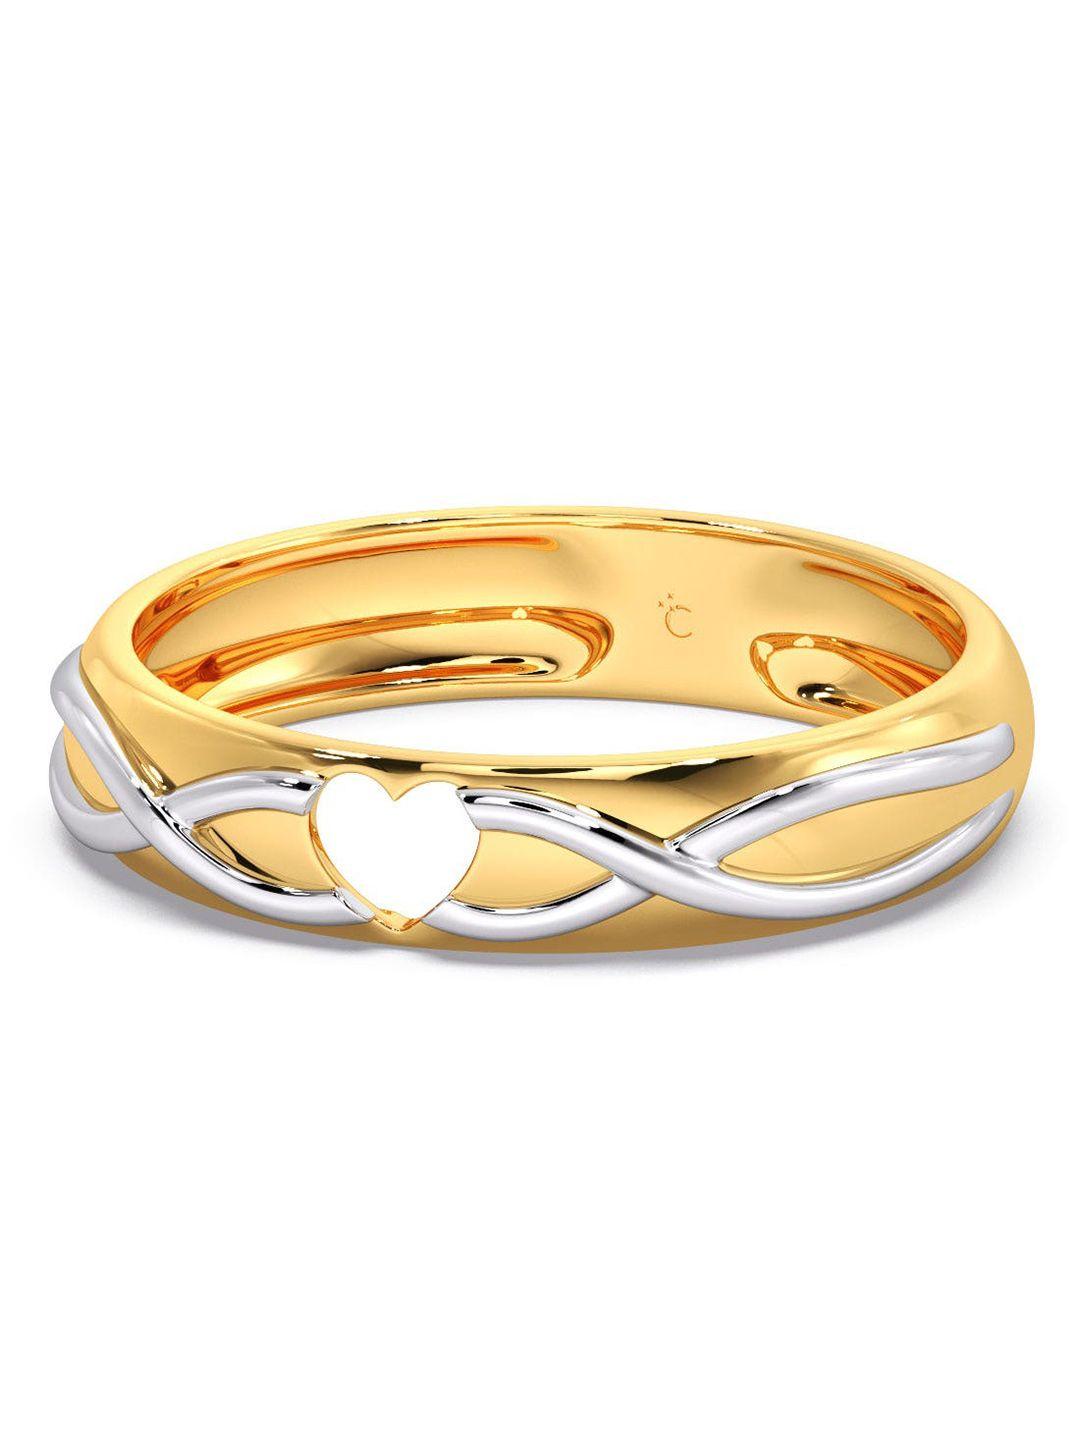 candere a kalyan jewellers company 18kt gold finger ring-3.18gm